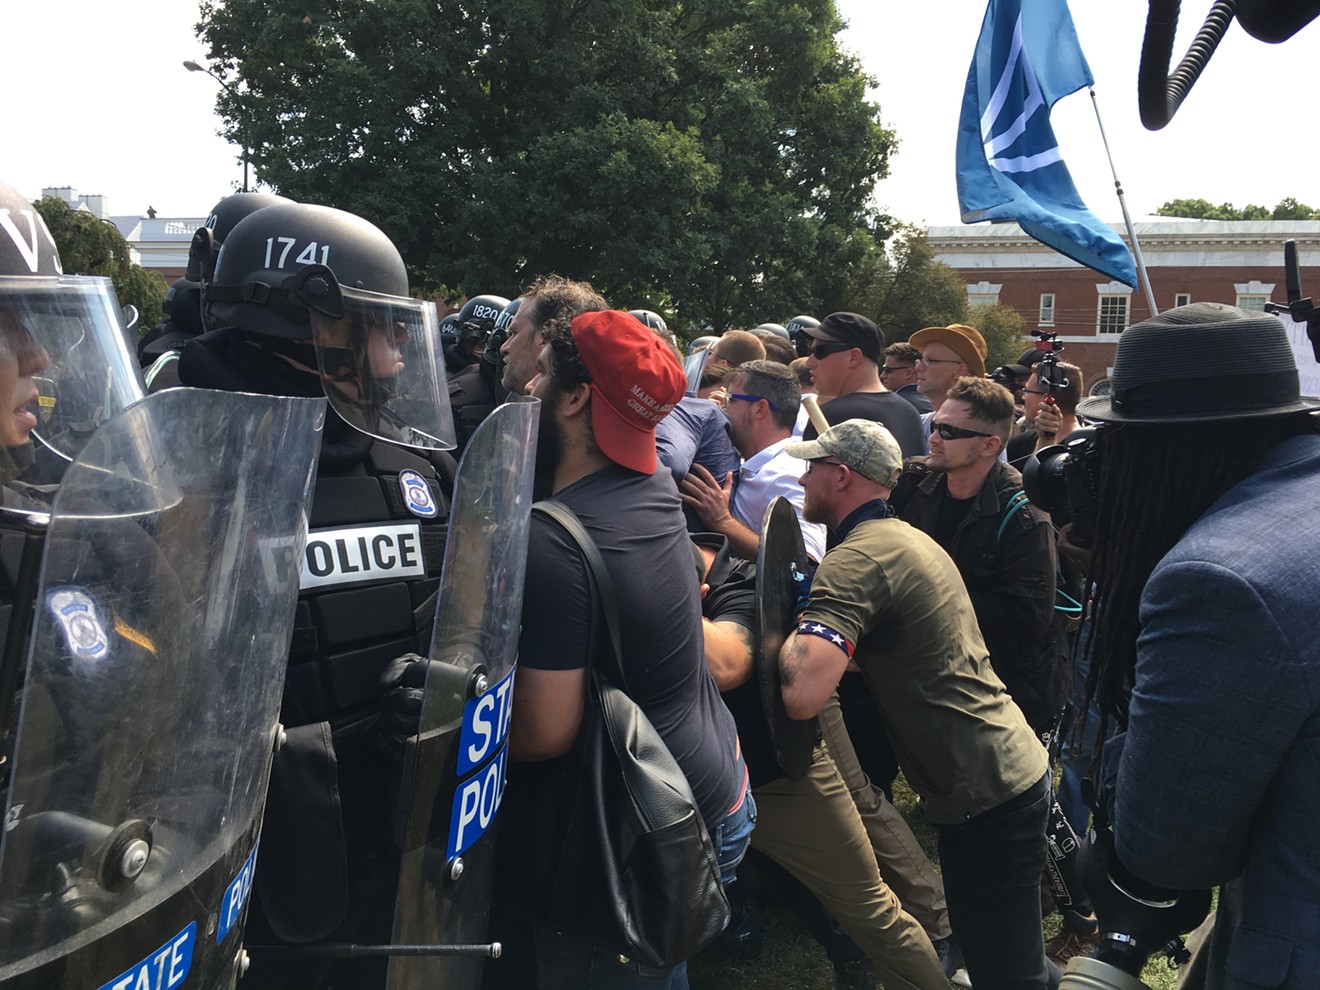 On Aug. 12, 2017, white nationalists swarmed Charlottesville and participated in the 'Unite the Right' rally